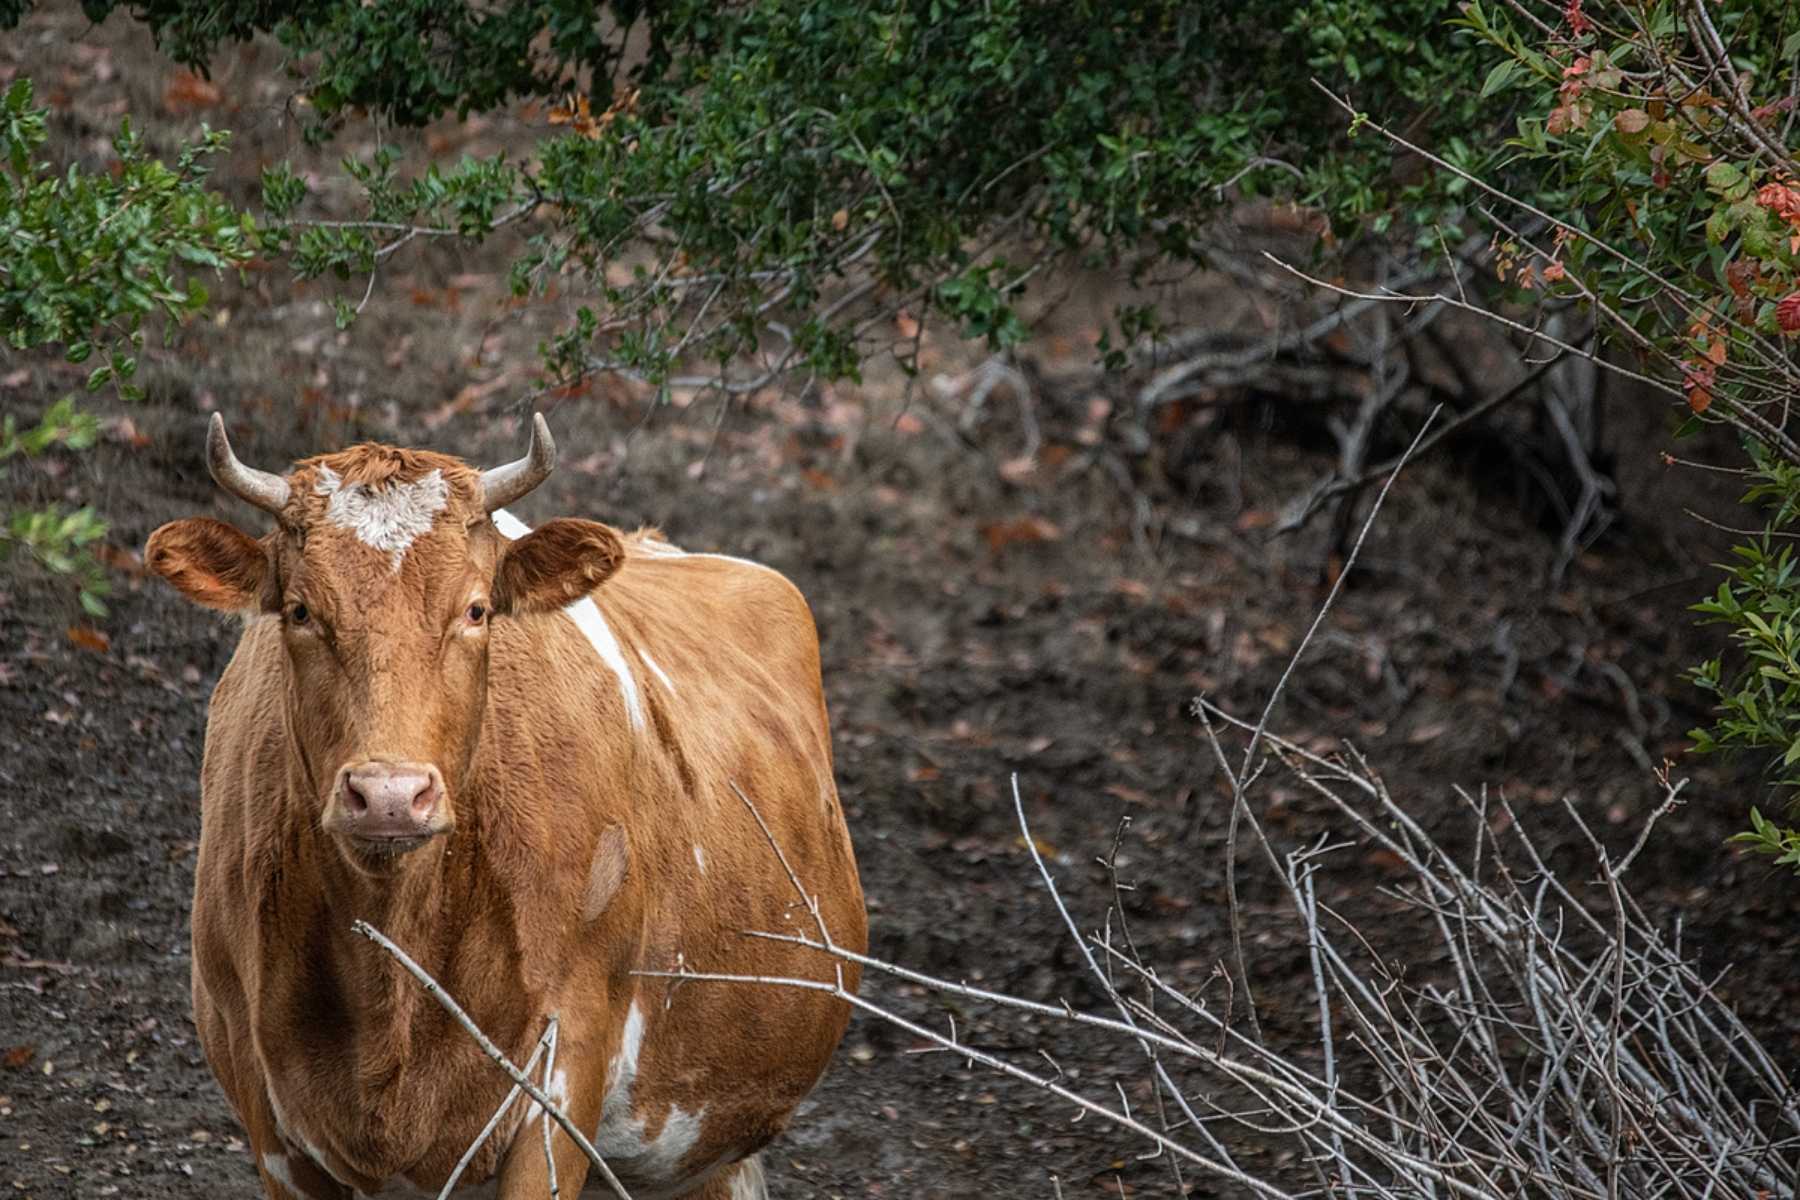 A rescued cow at Rancho Compasión farmed animal sanctuary.